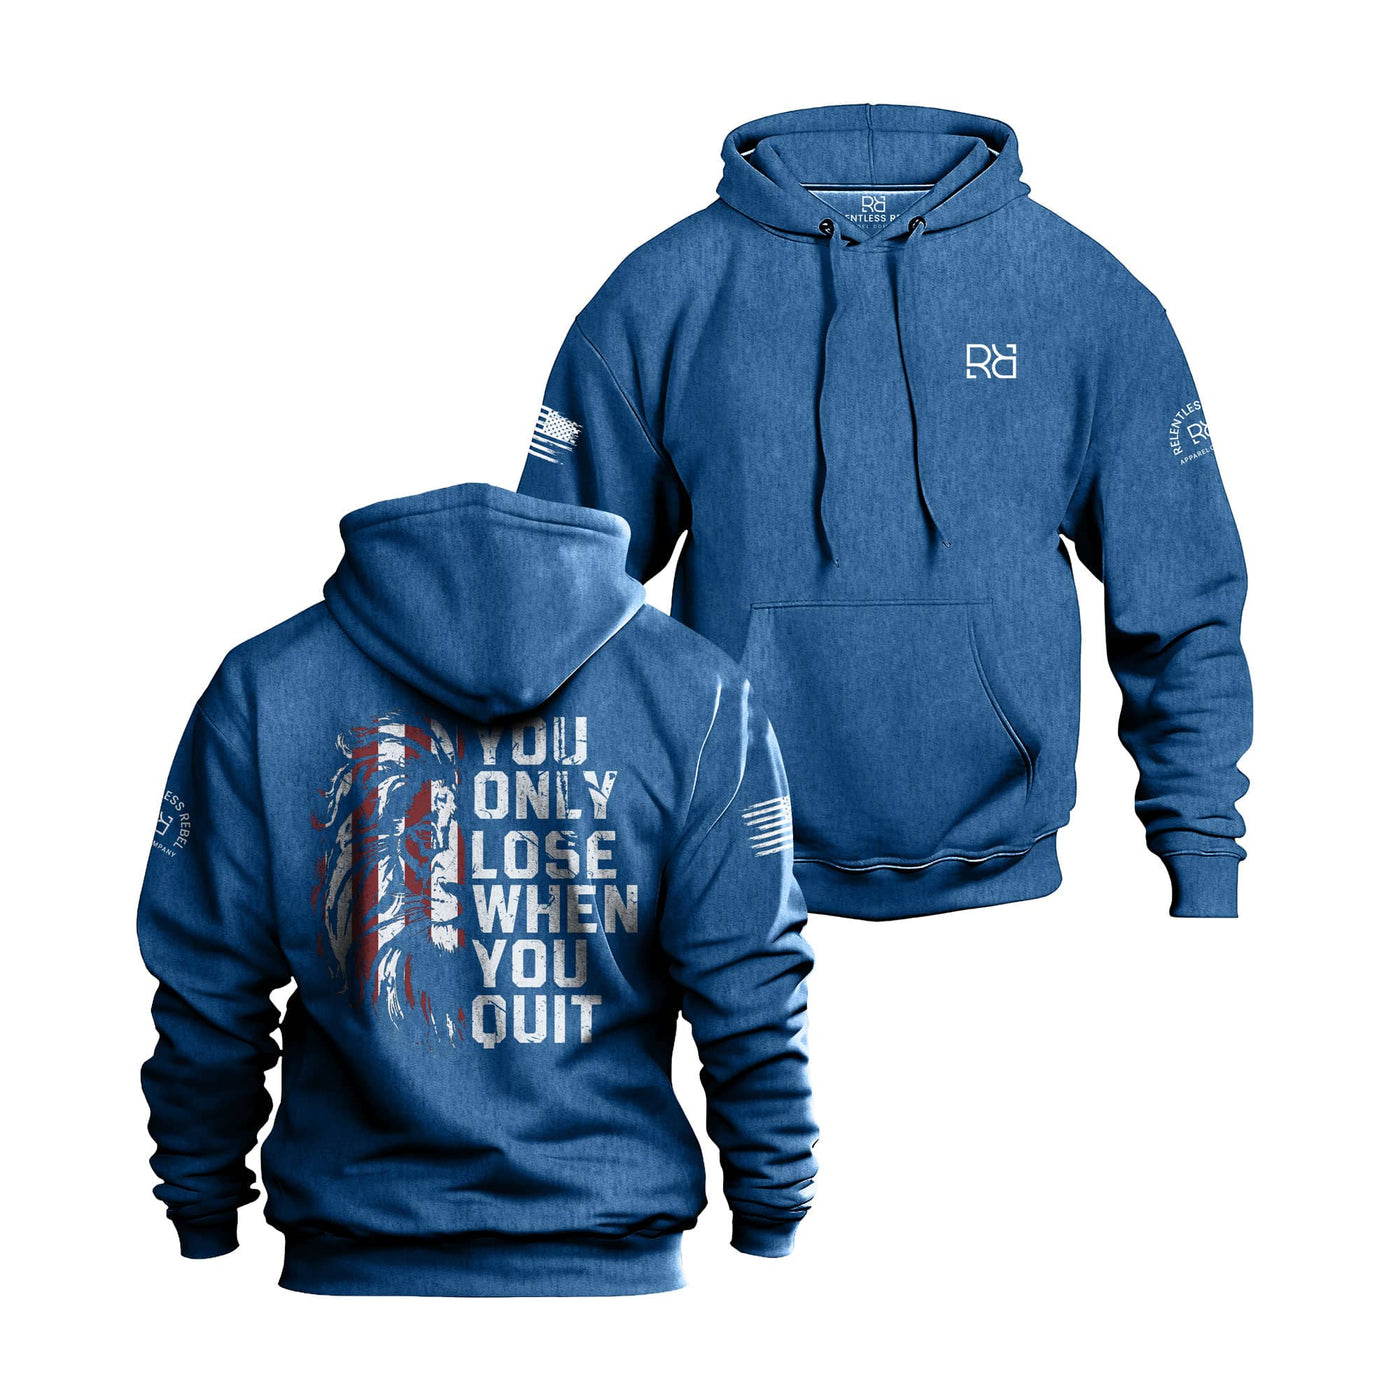 Royal Heather Men's You Only Lose When You Quit Back Design Hoodie